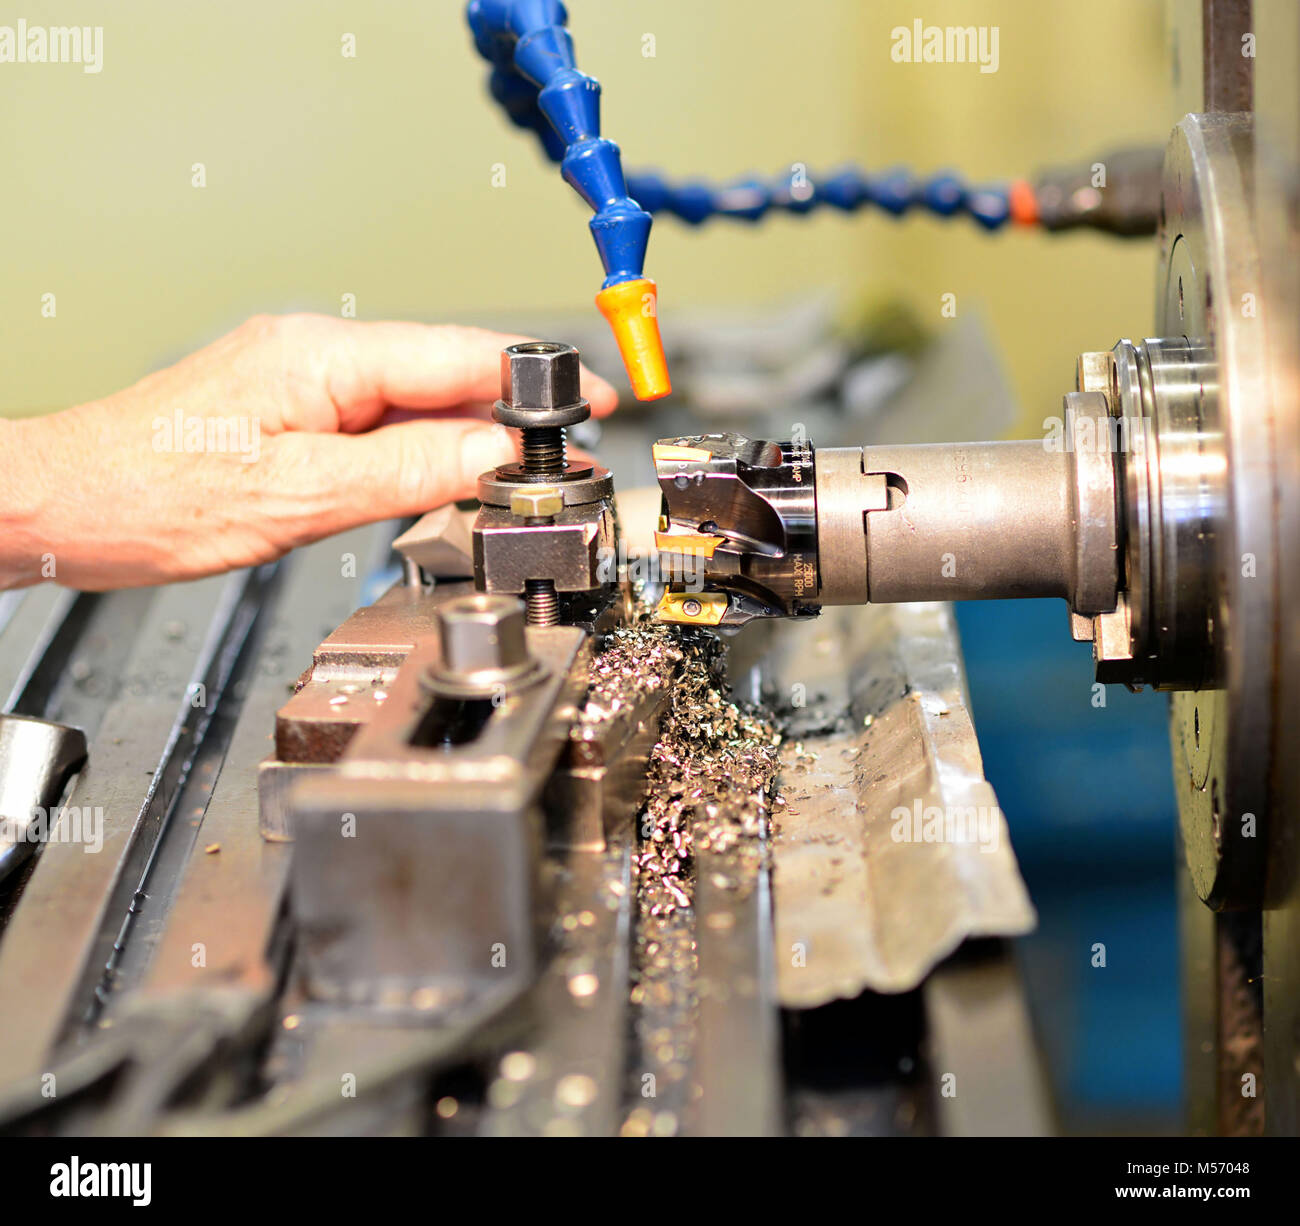 cnc milling machine machining metal work piece in an industrial company for mechanical engineering Stock Photo